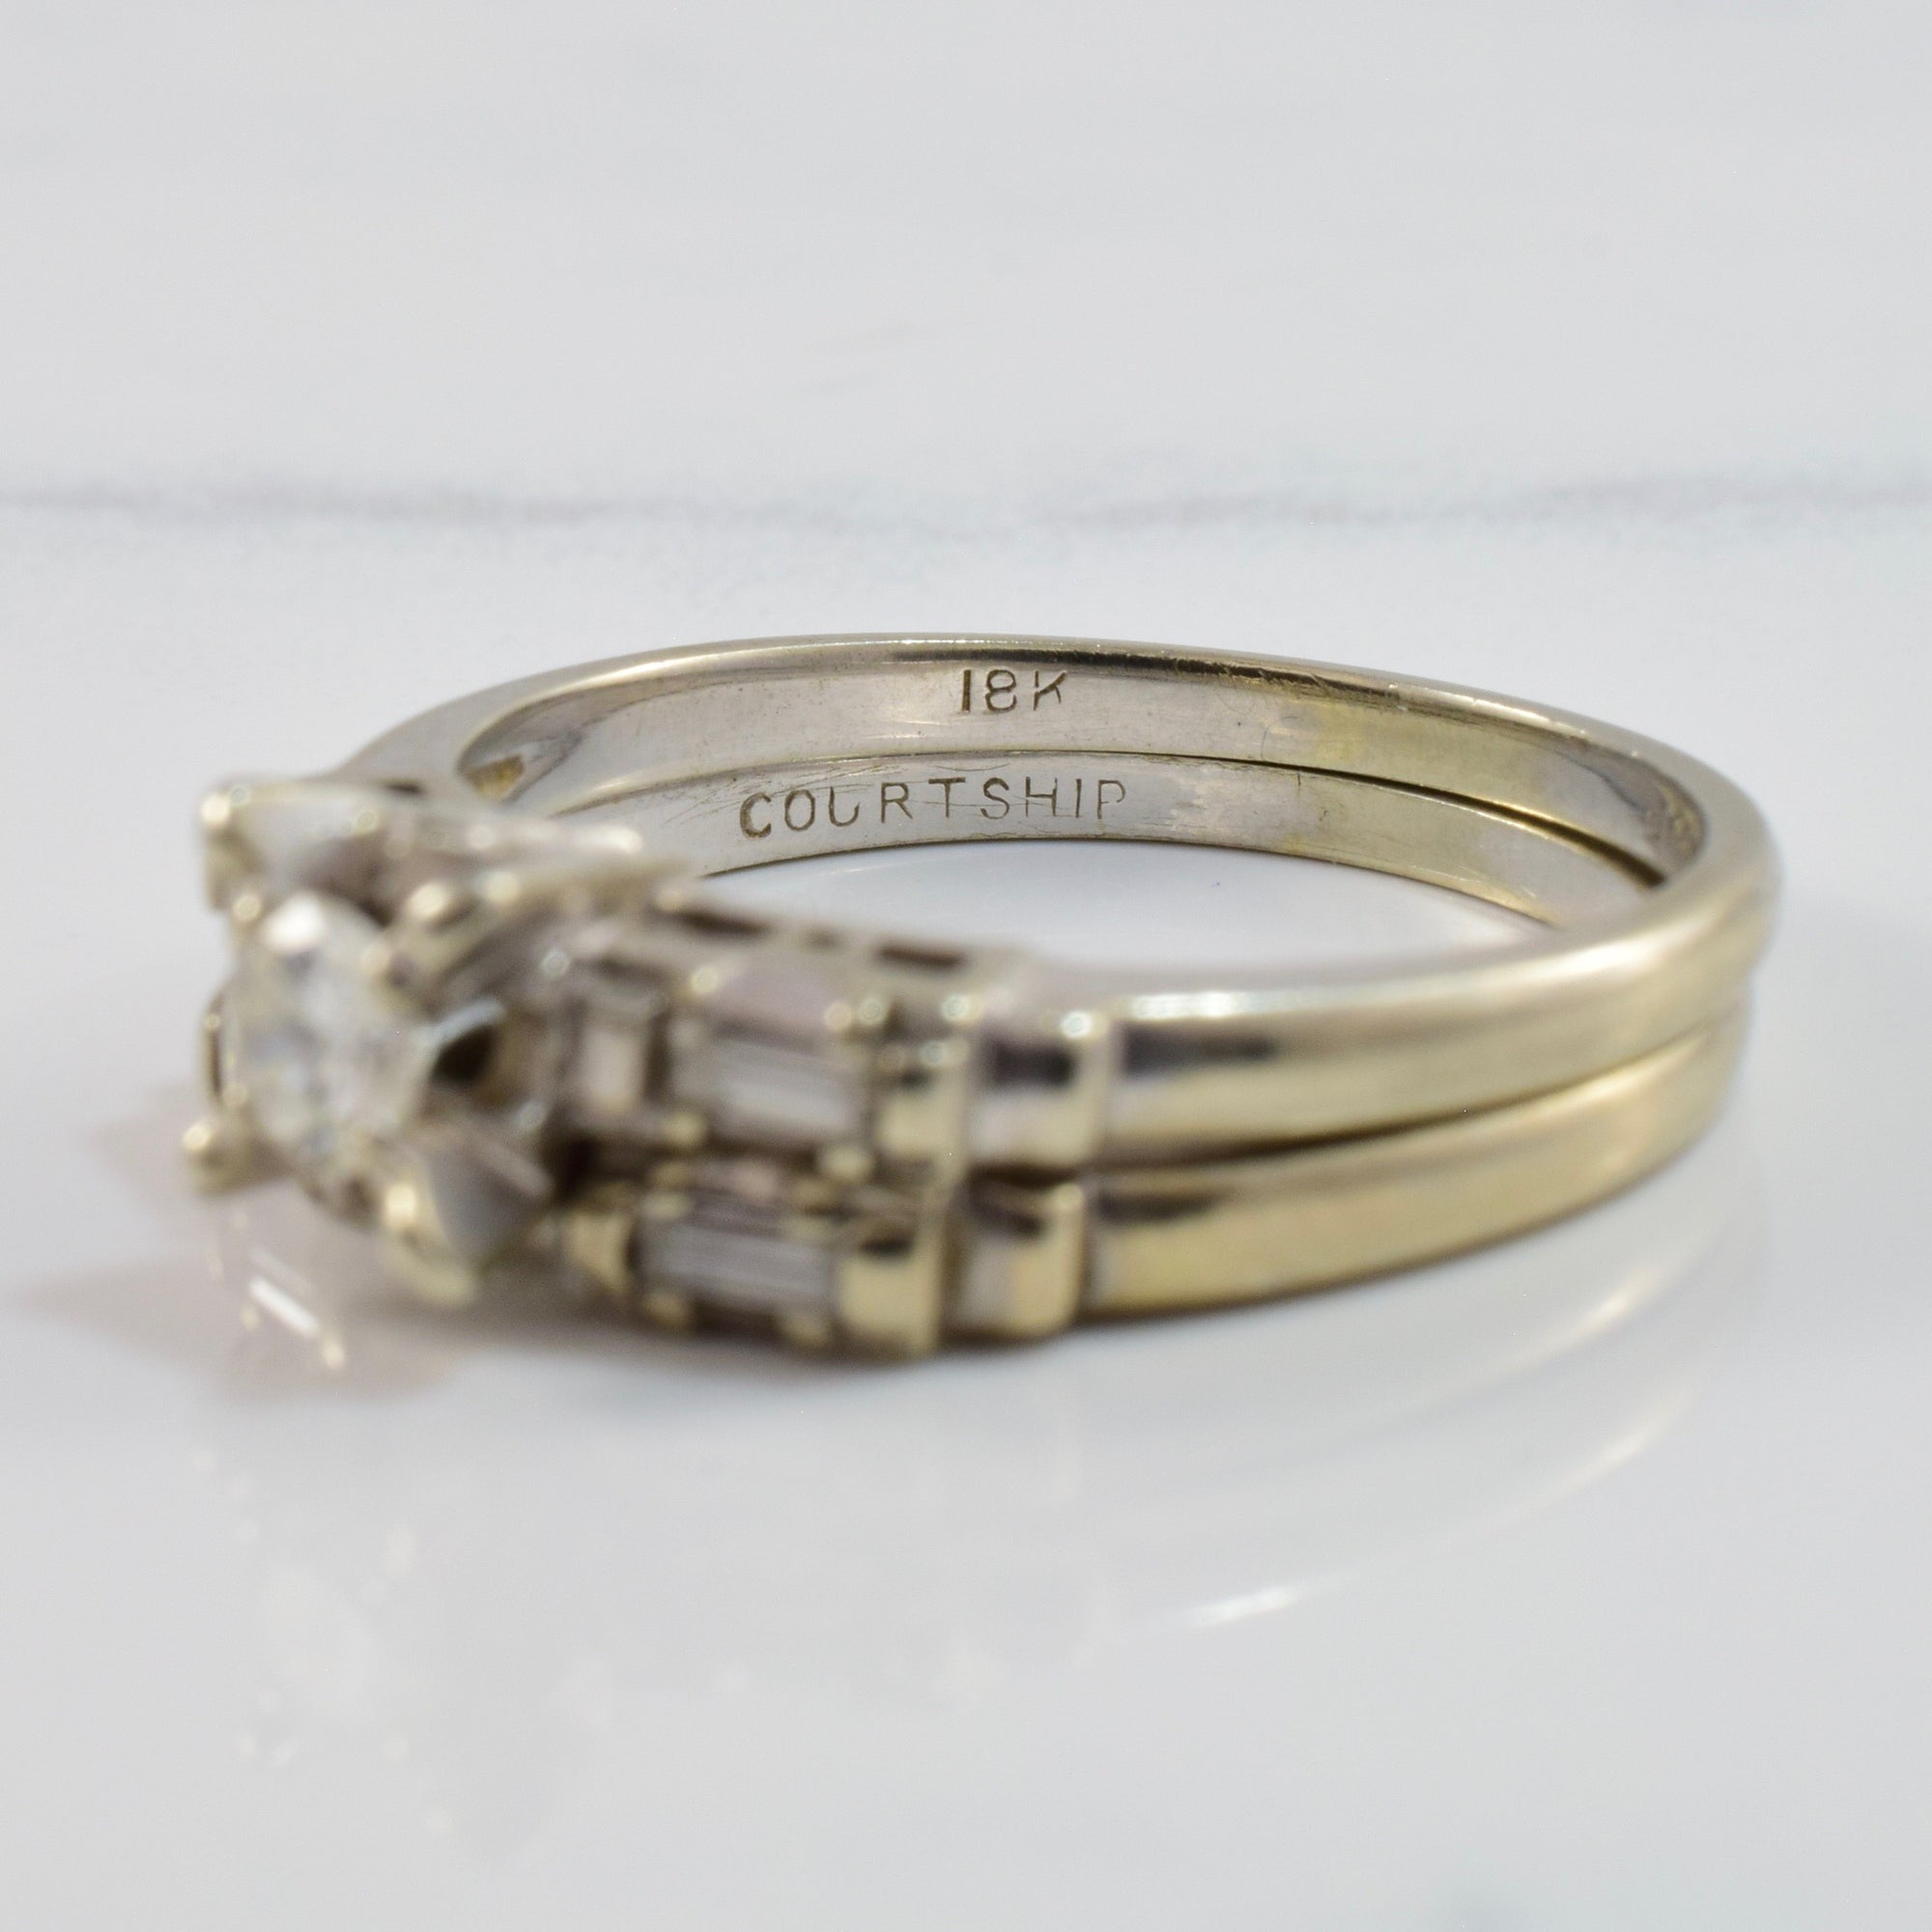 vintage engagement ring in Canada, antique diamond ring